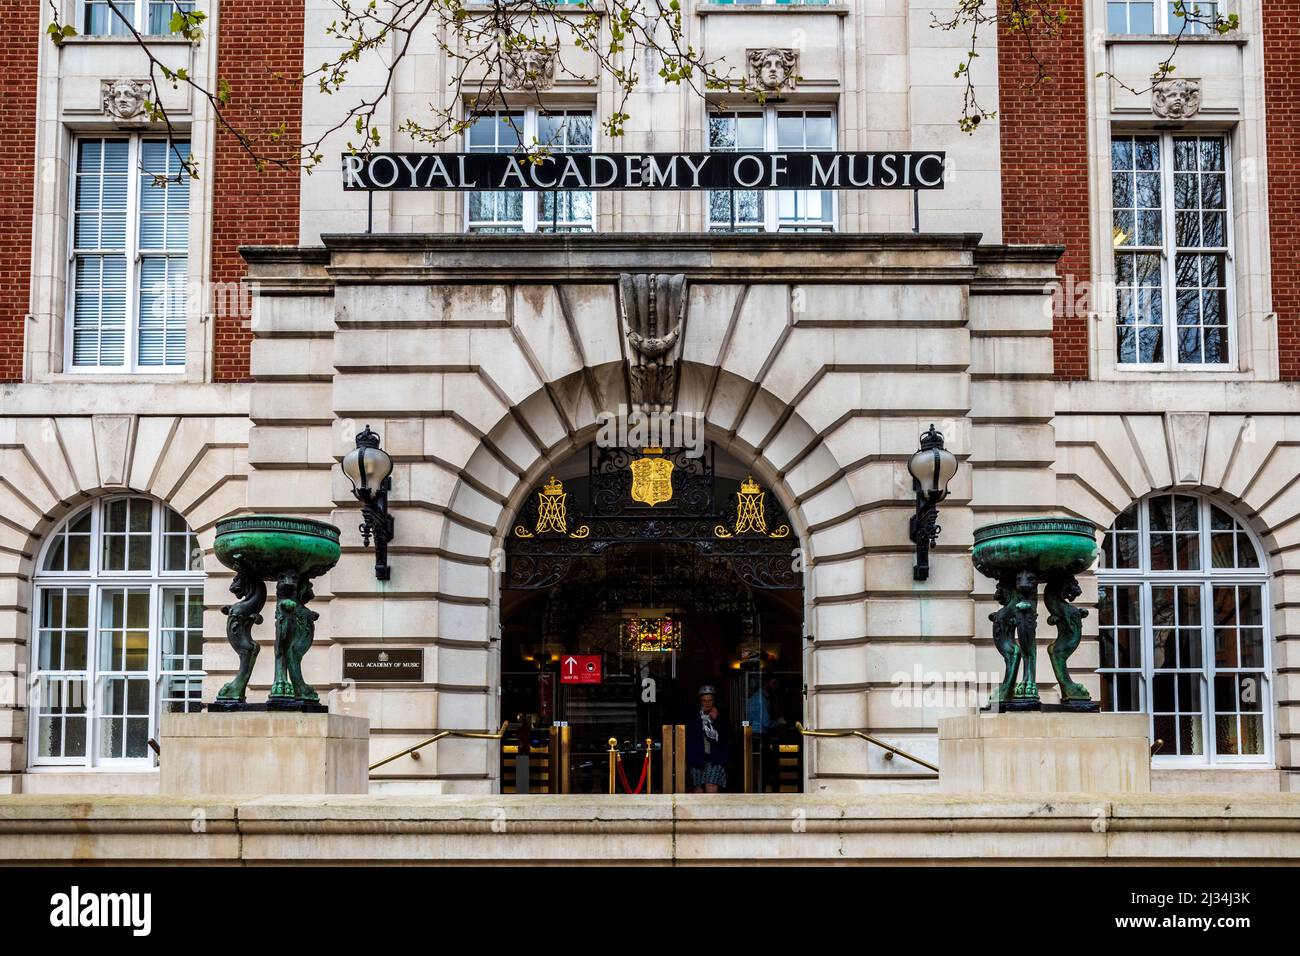 Royal Academy of Music London. Founded in 1822 the Royal Academy of Music is the oldest conservatoire in the UK. Also known as RAM London. Stock Photo